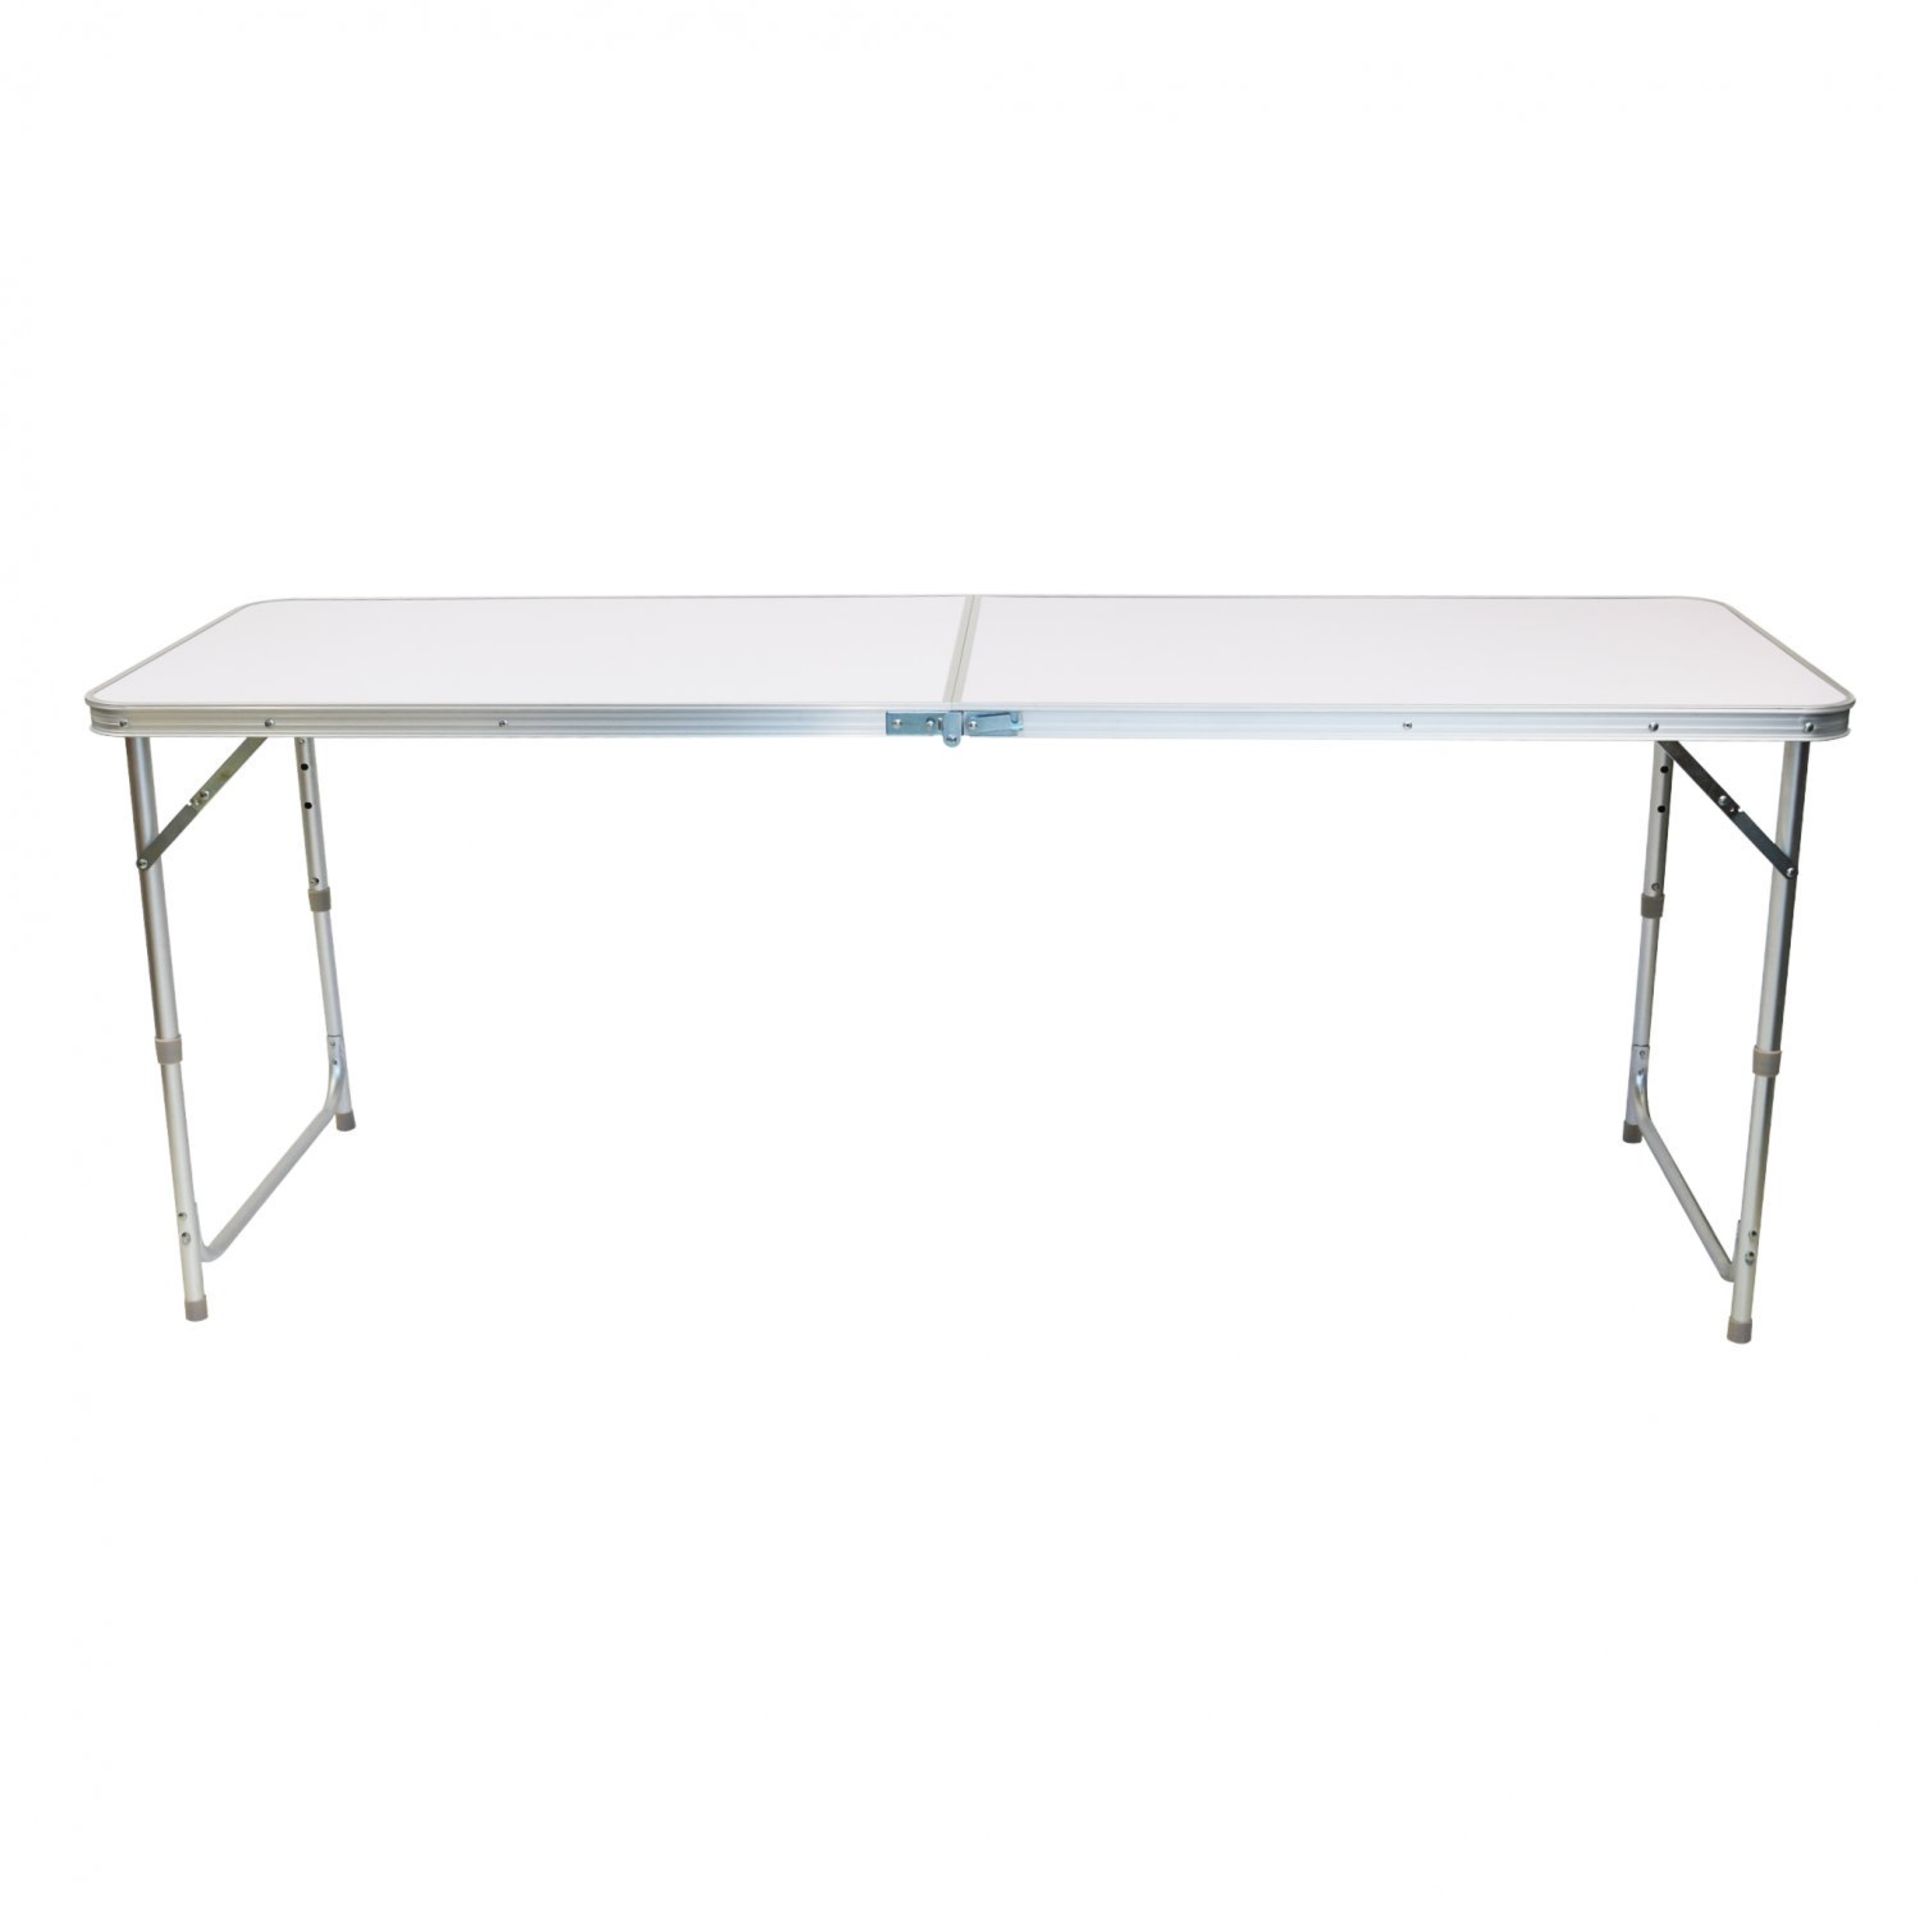 (SK12) 4ft Folding Outdoor Camping Kitchen Work Top Table The aluminium folding picnic table... - Image 2 of 2